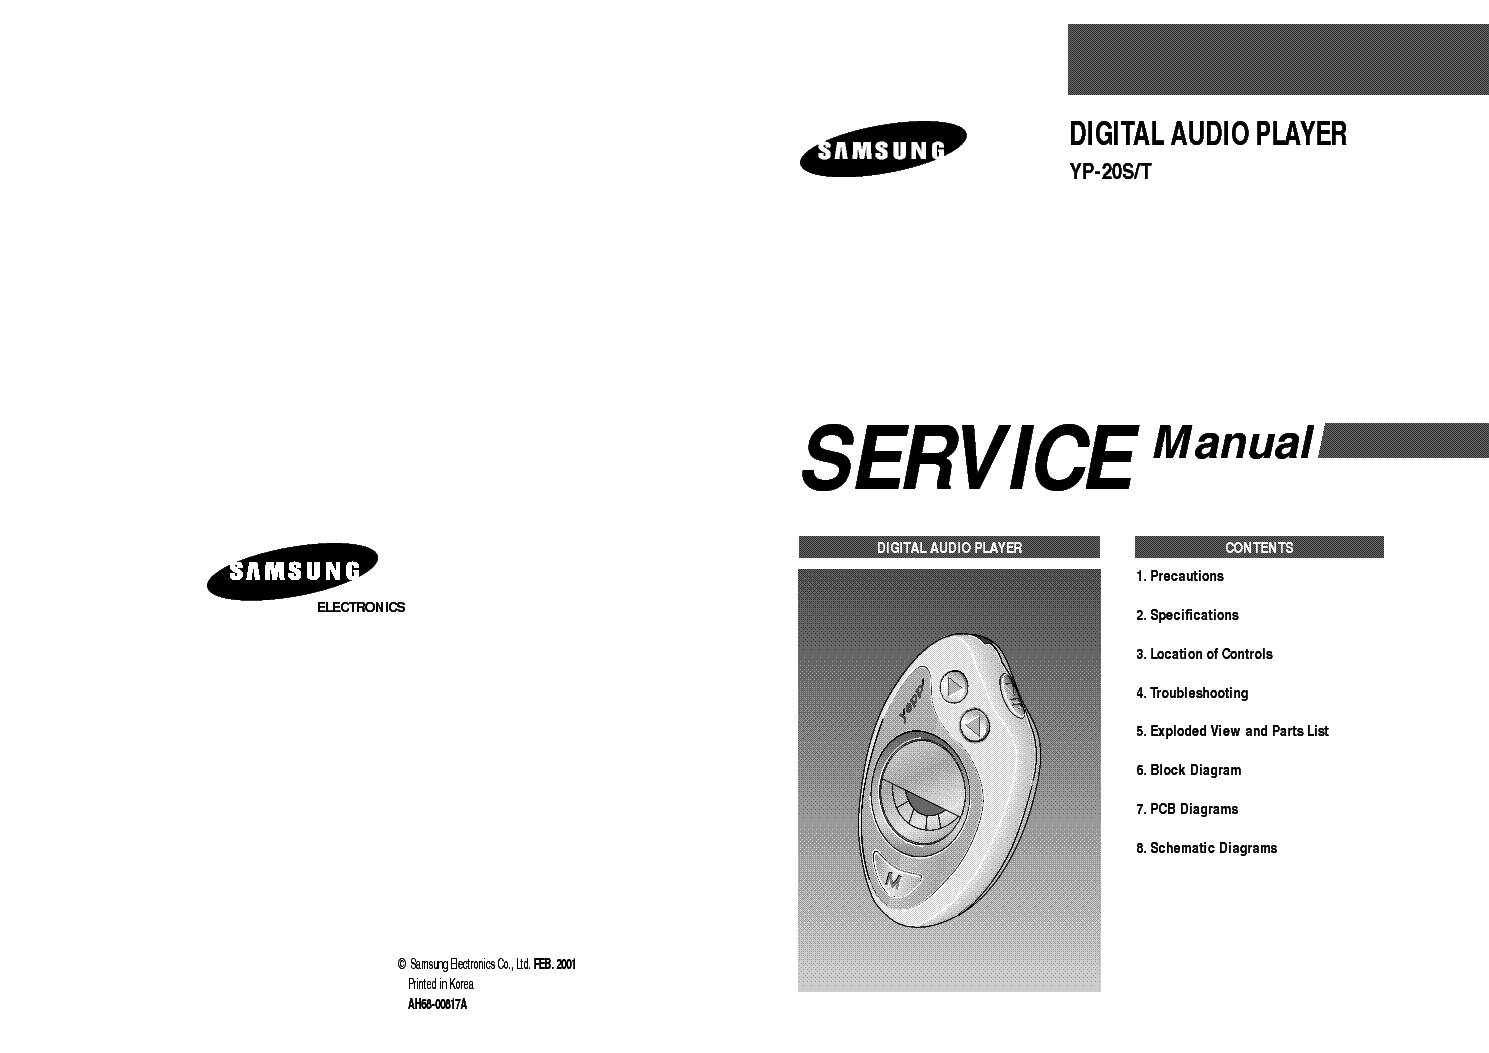 SAMSUNG YP-20 service manual (1st page)